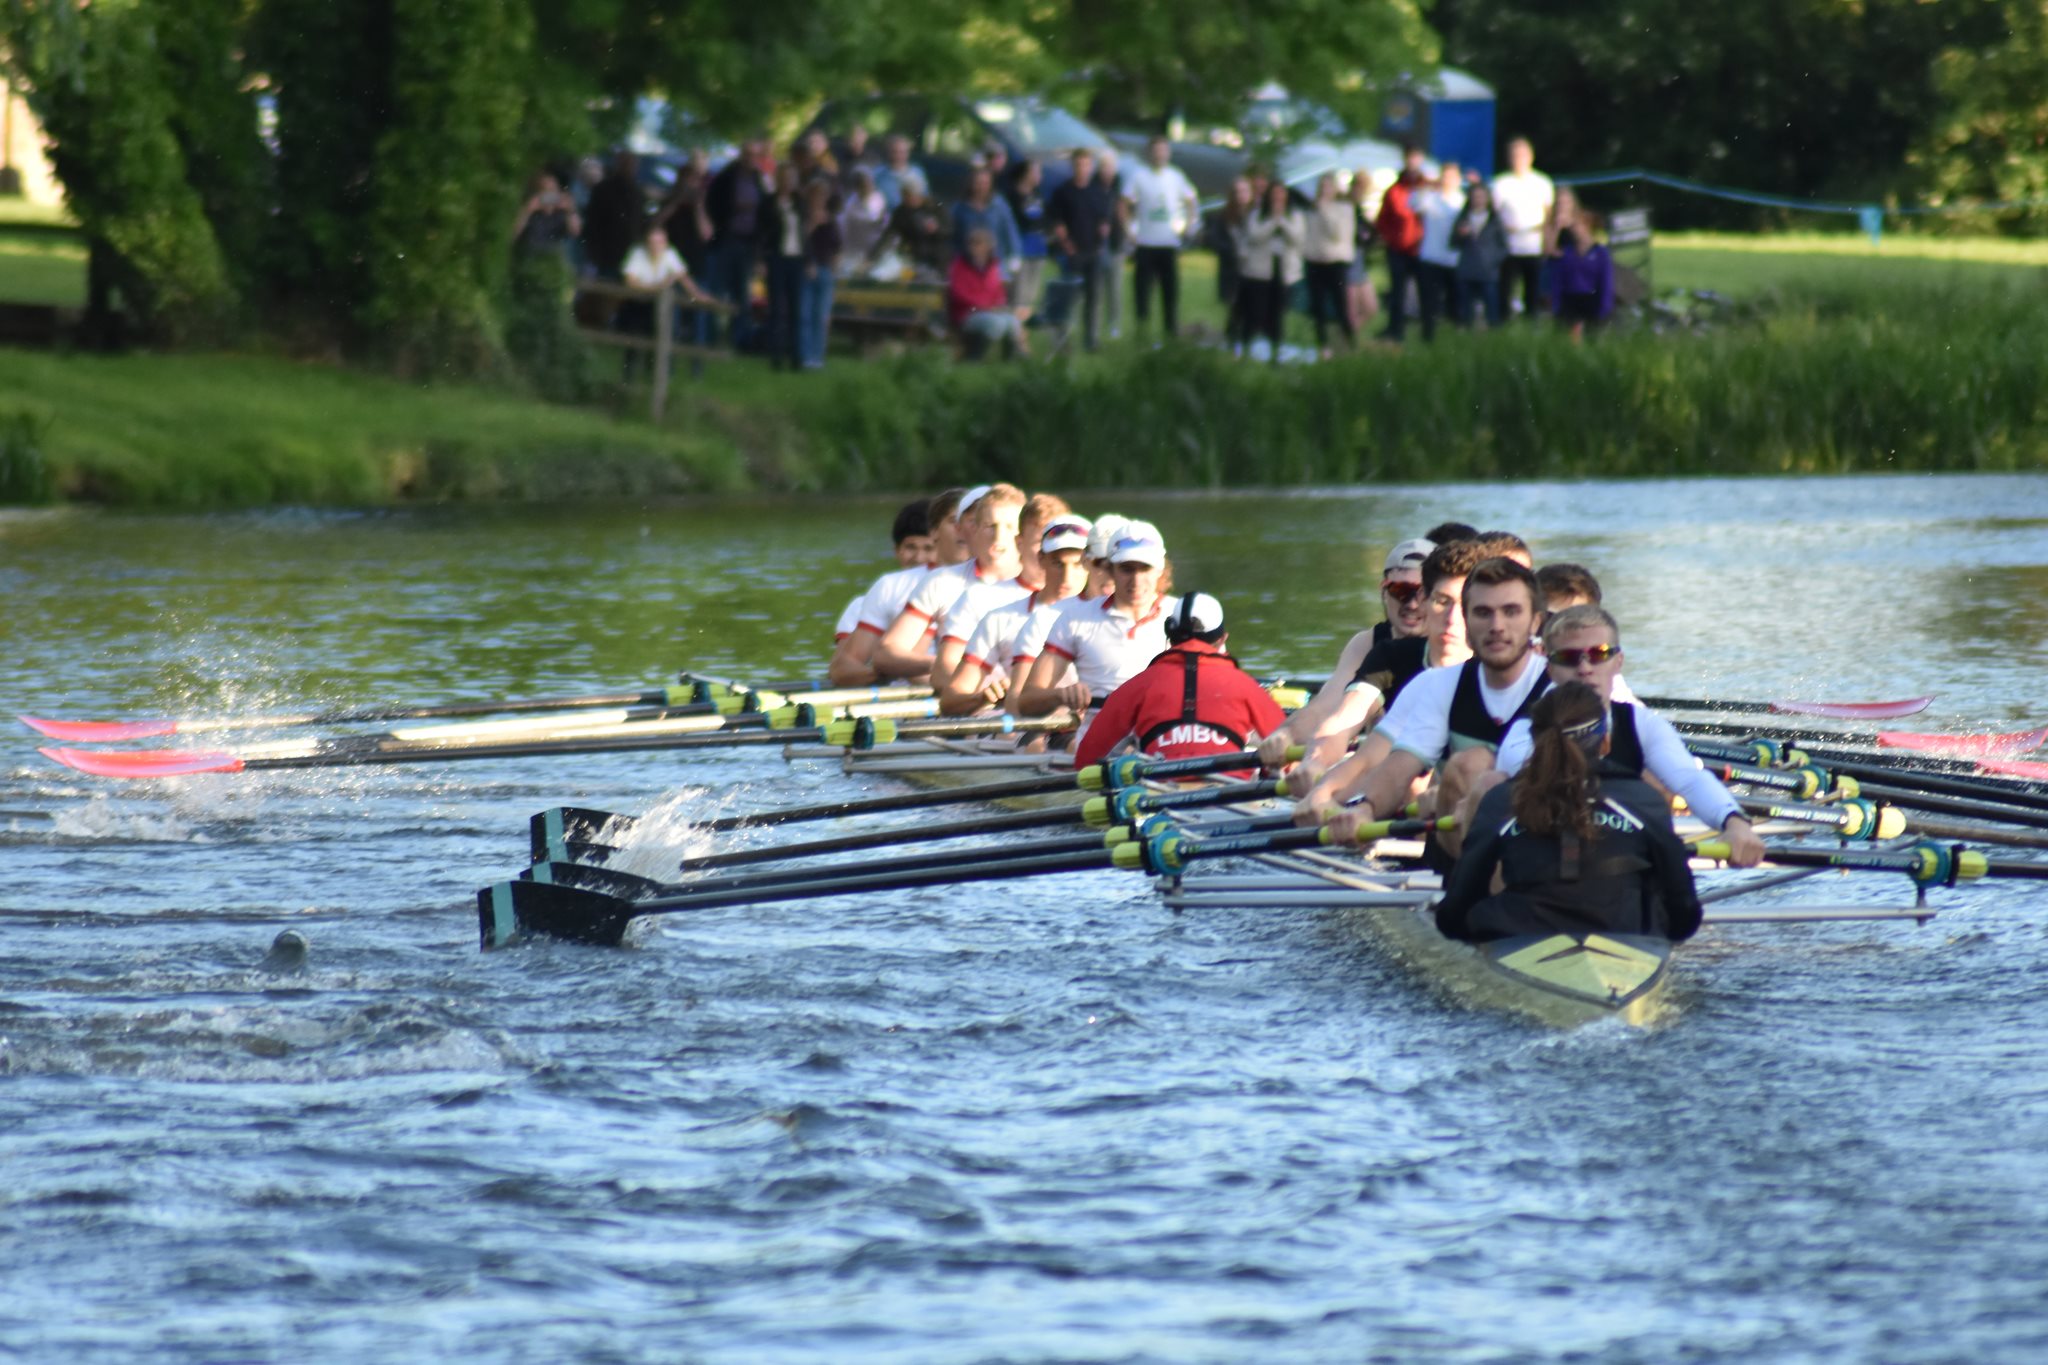 Two boats competing in May Bumps 2019 on the River Cam